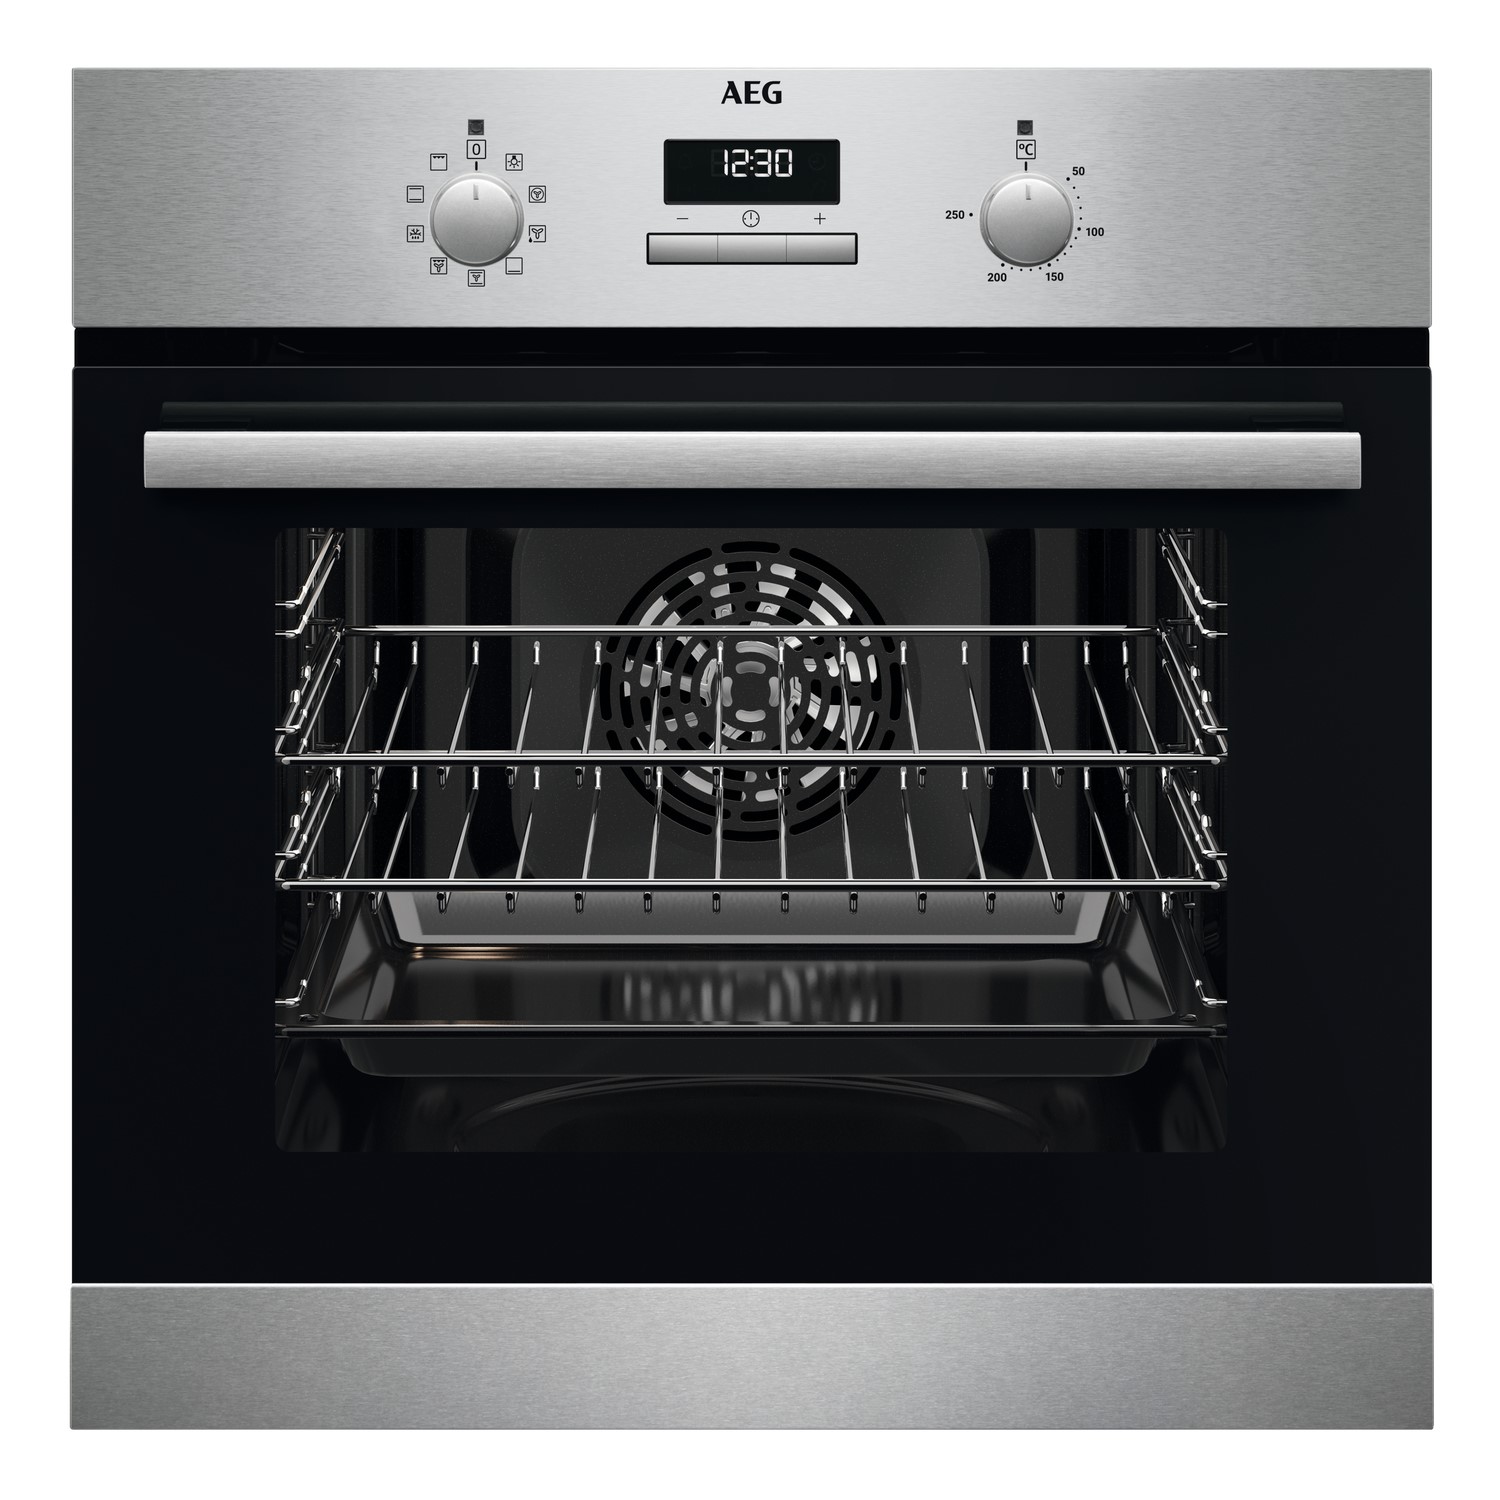 Photos - Other for Computer AEG Series 6000 Electric Single Oven - Stainless Steel 944068451 